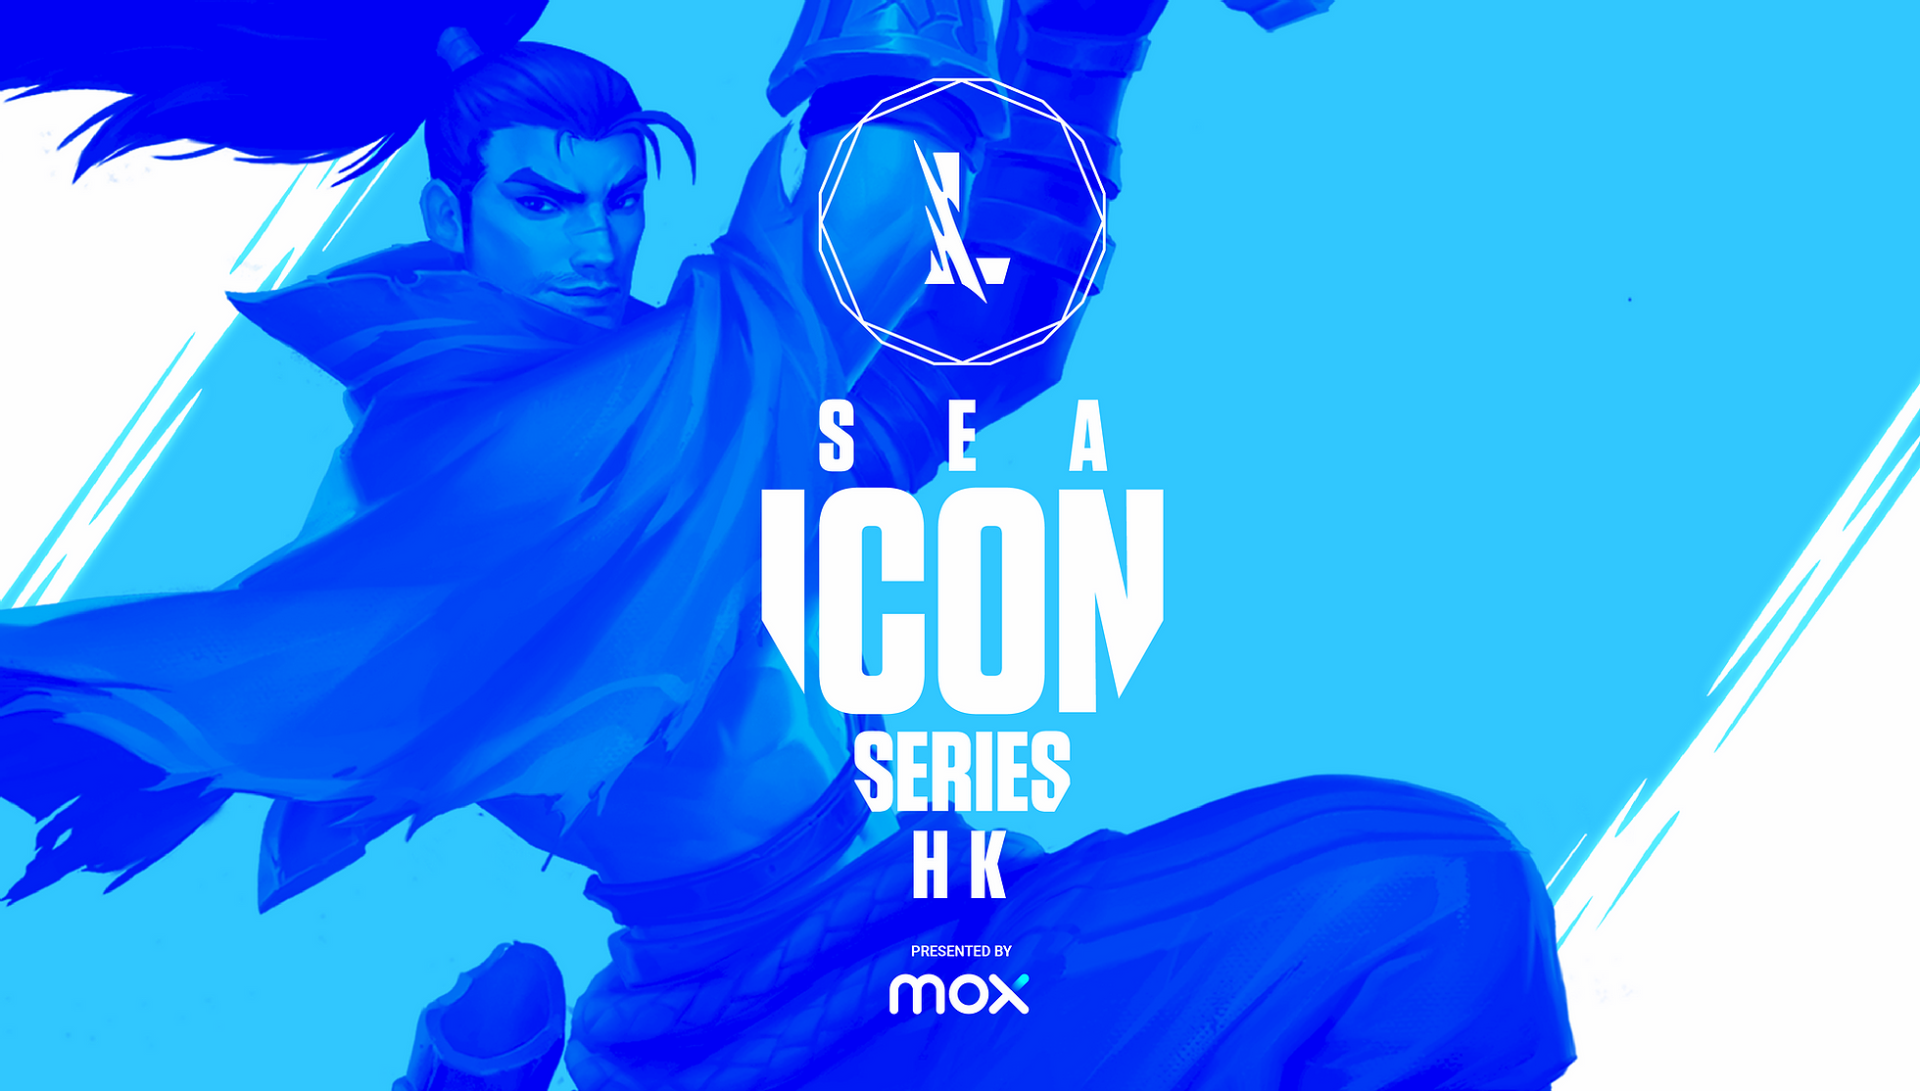 Mox Presents League Of Legends: Wild Rift And The Sea Icon Series In Hong Kong